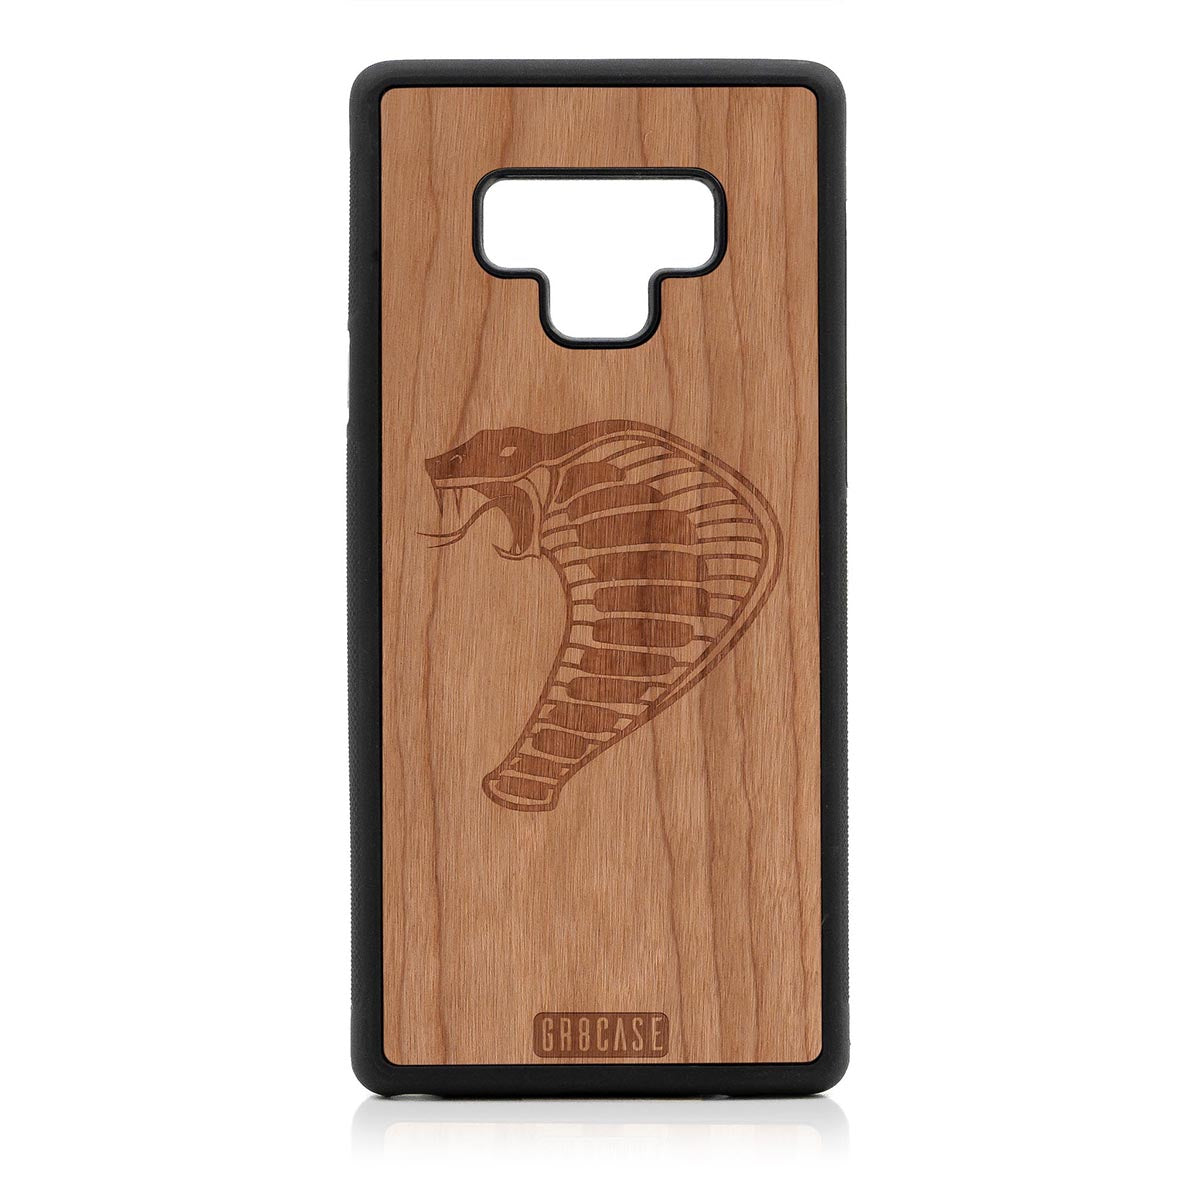 Cobra Design Wood Case For Samsung Galaxy Note 9 by GR8CASE